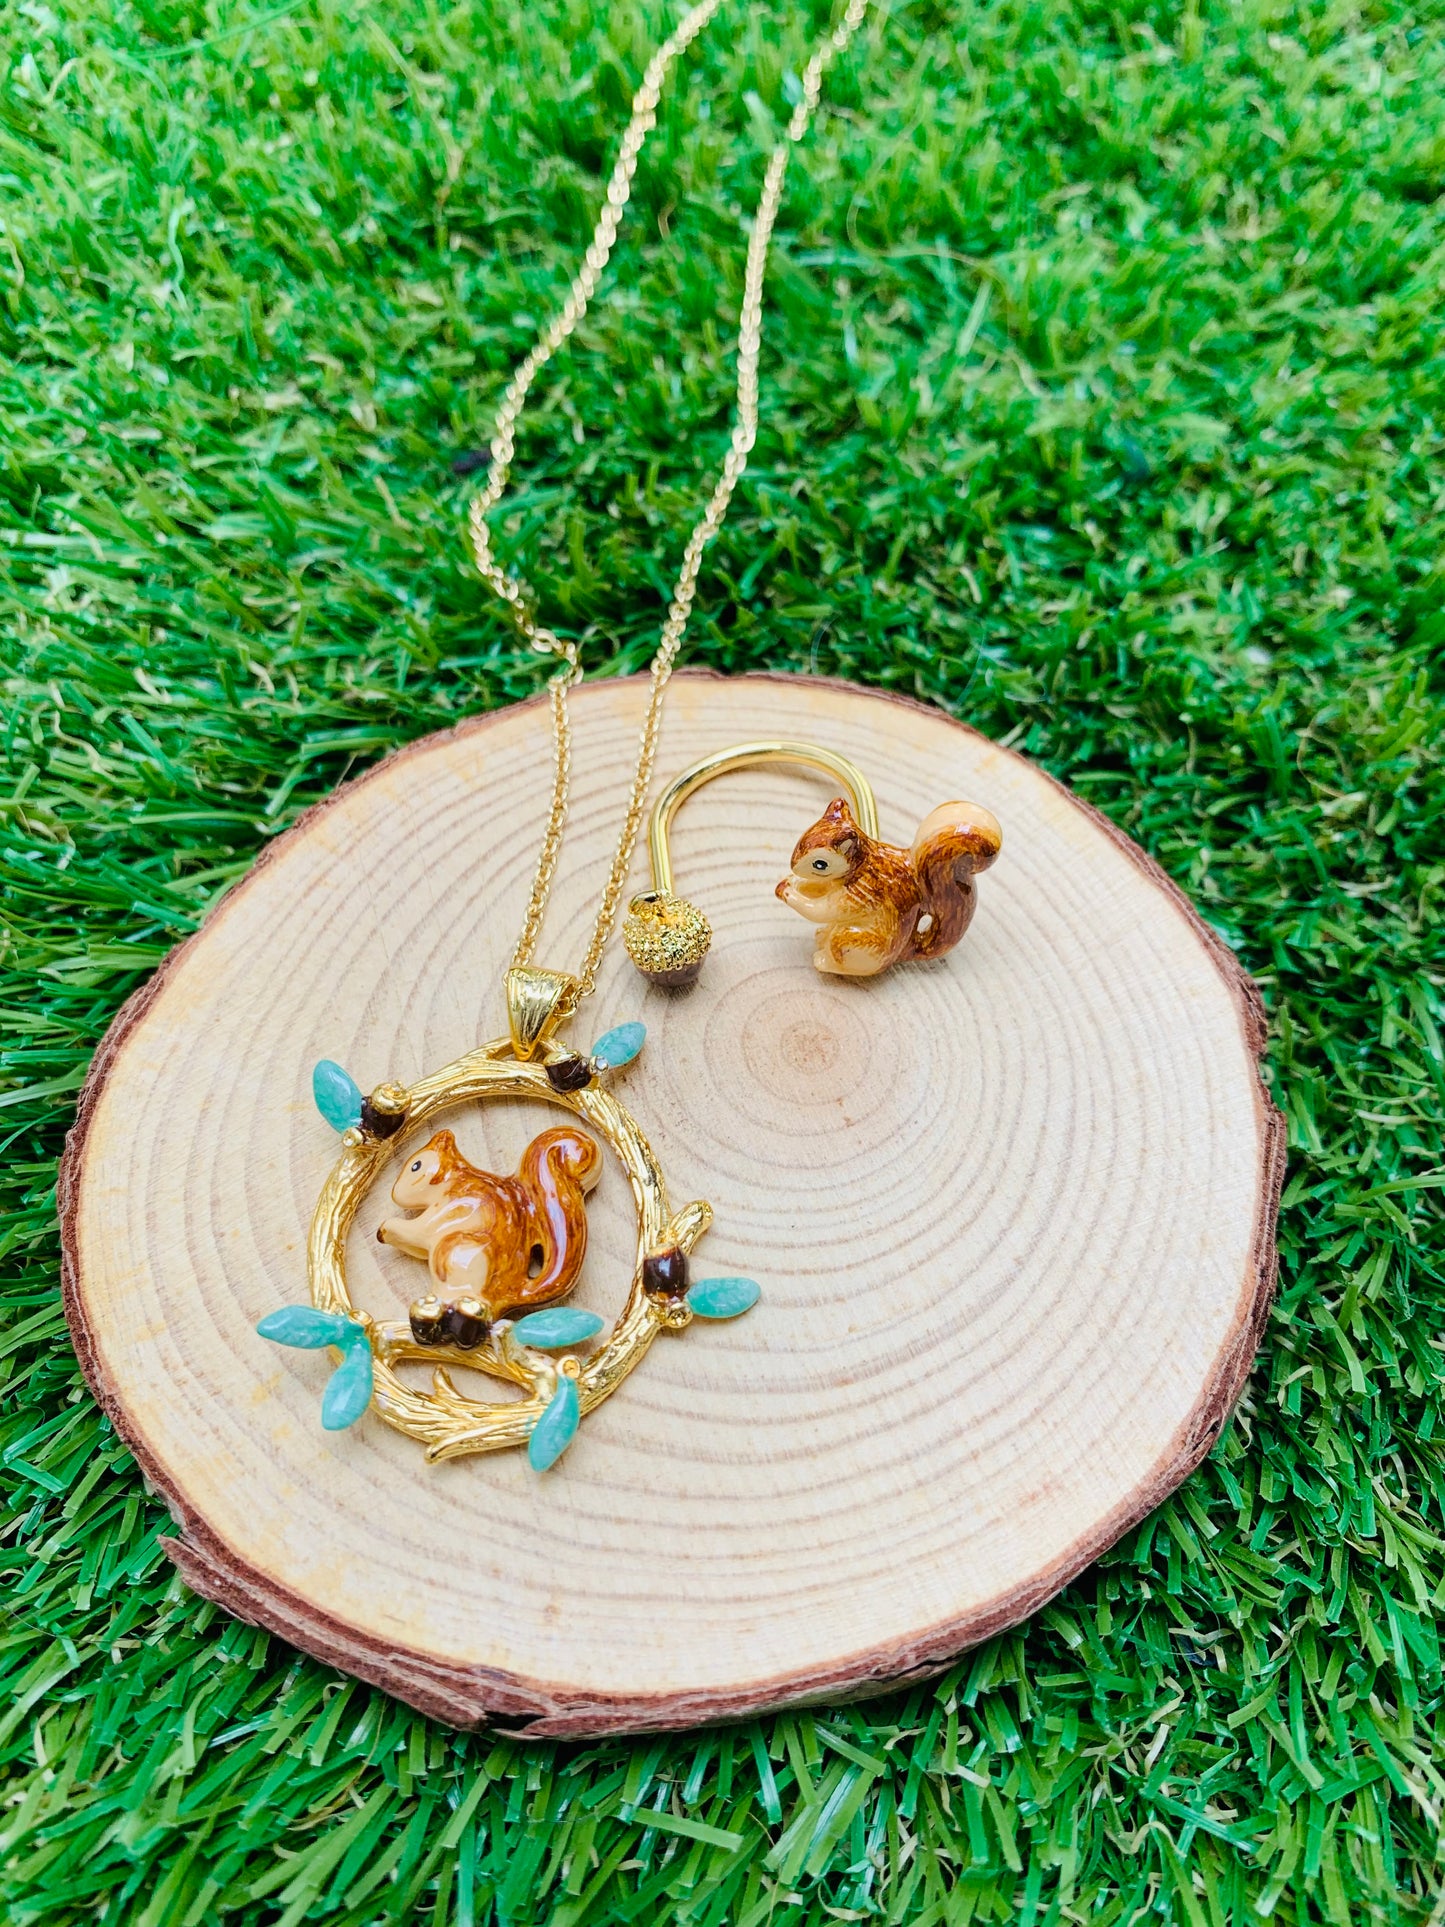 Handmade Squirrel Necklace, Squirrel Ring and Acorn Earring